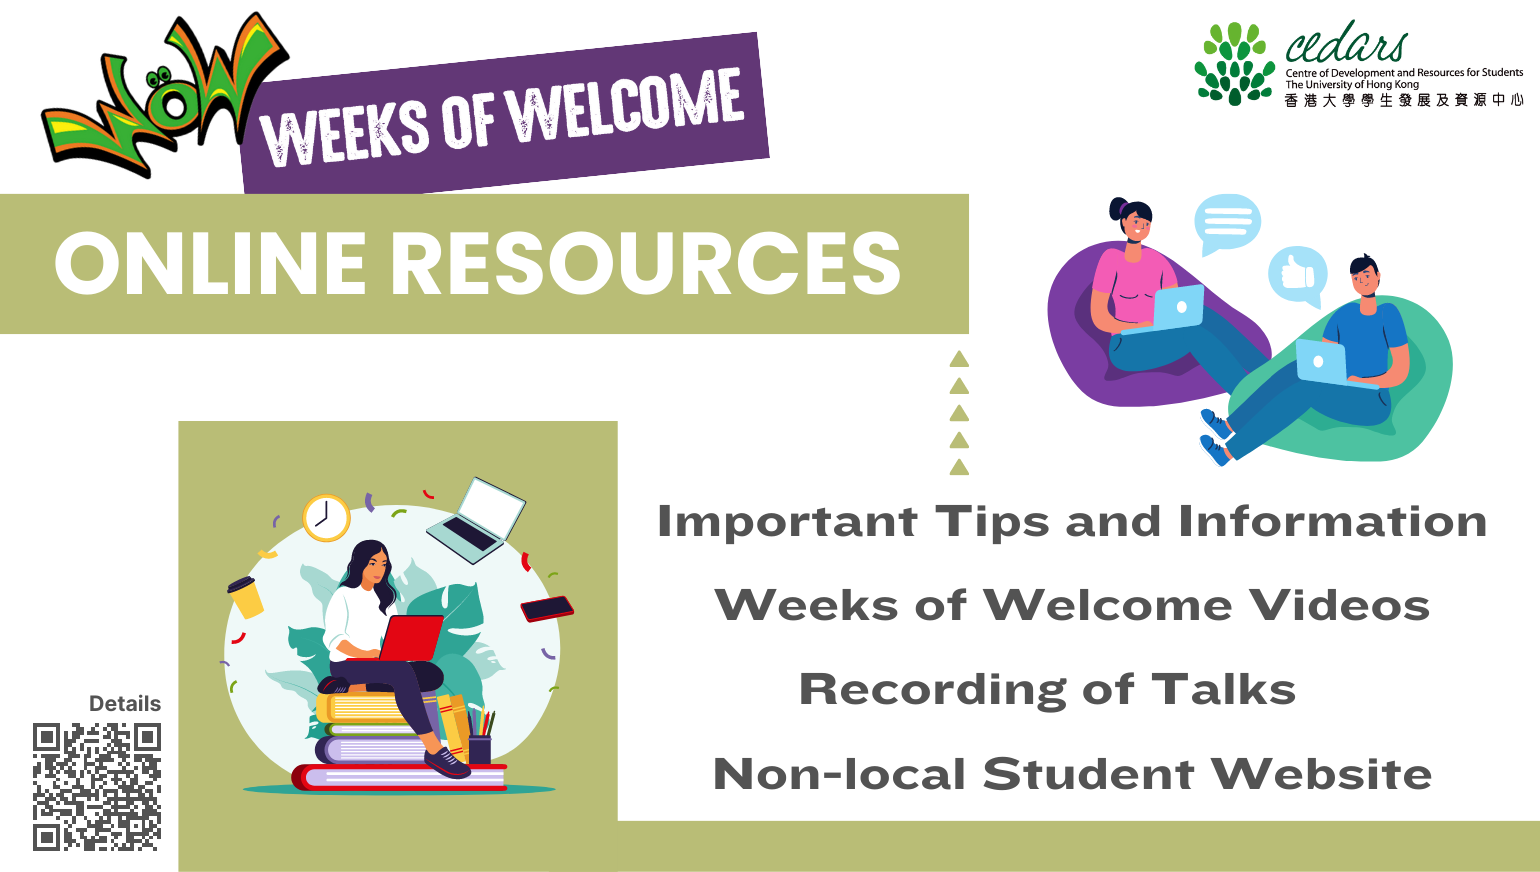 OnlineResources for non-local students